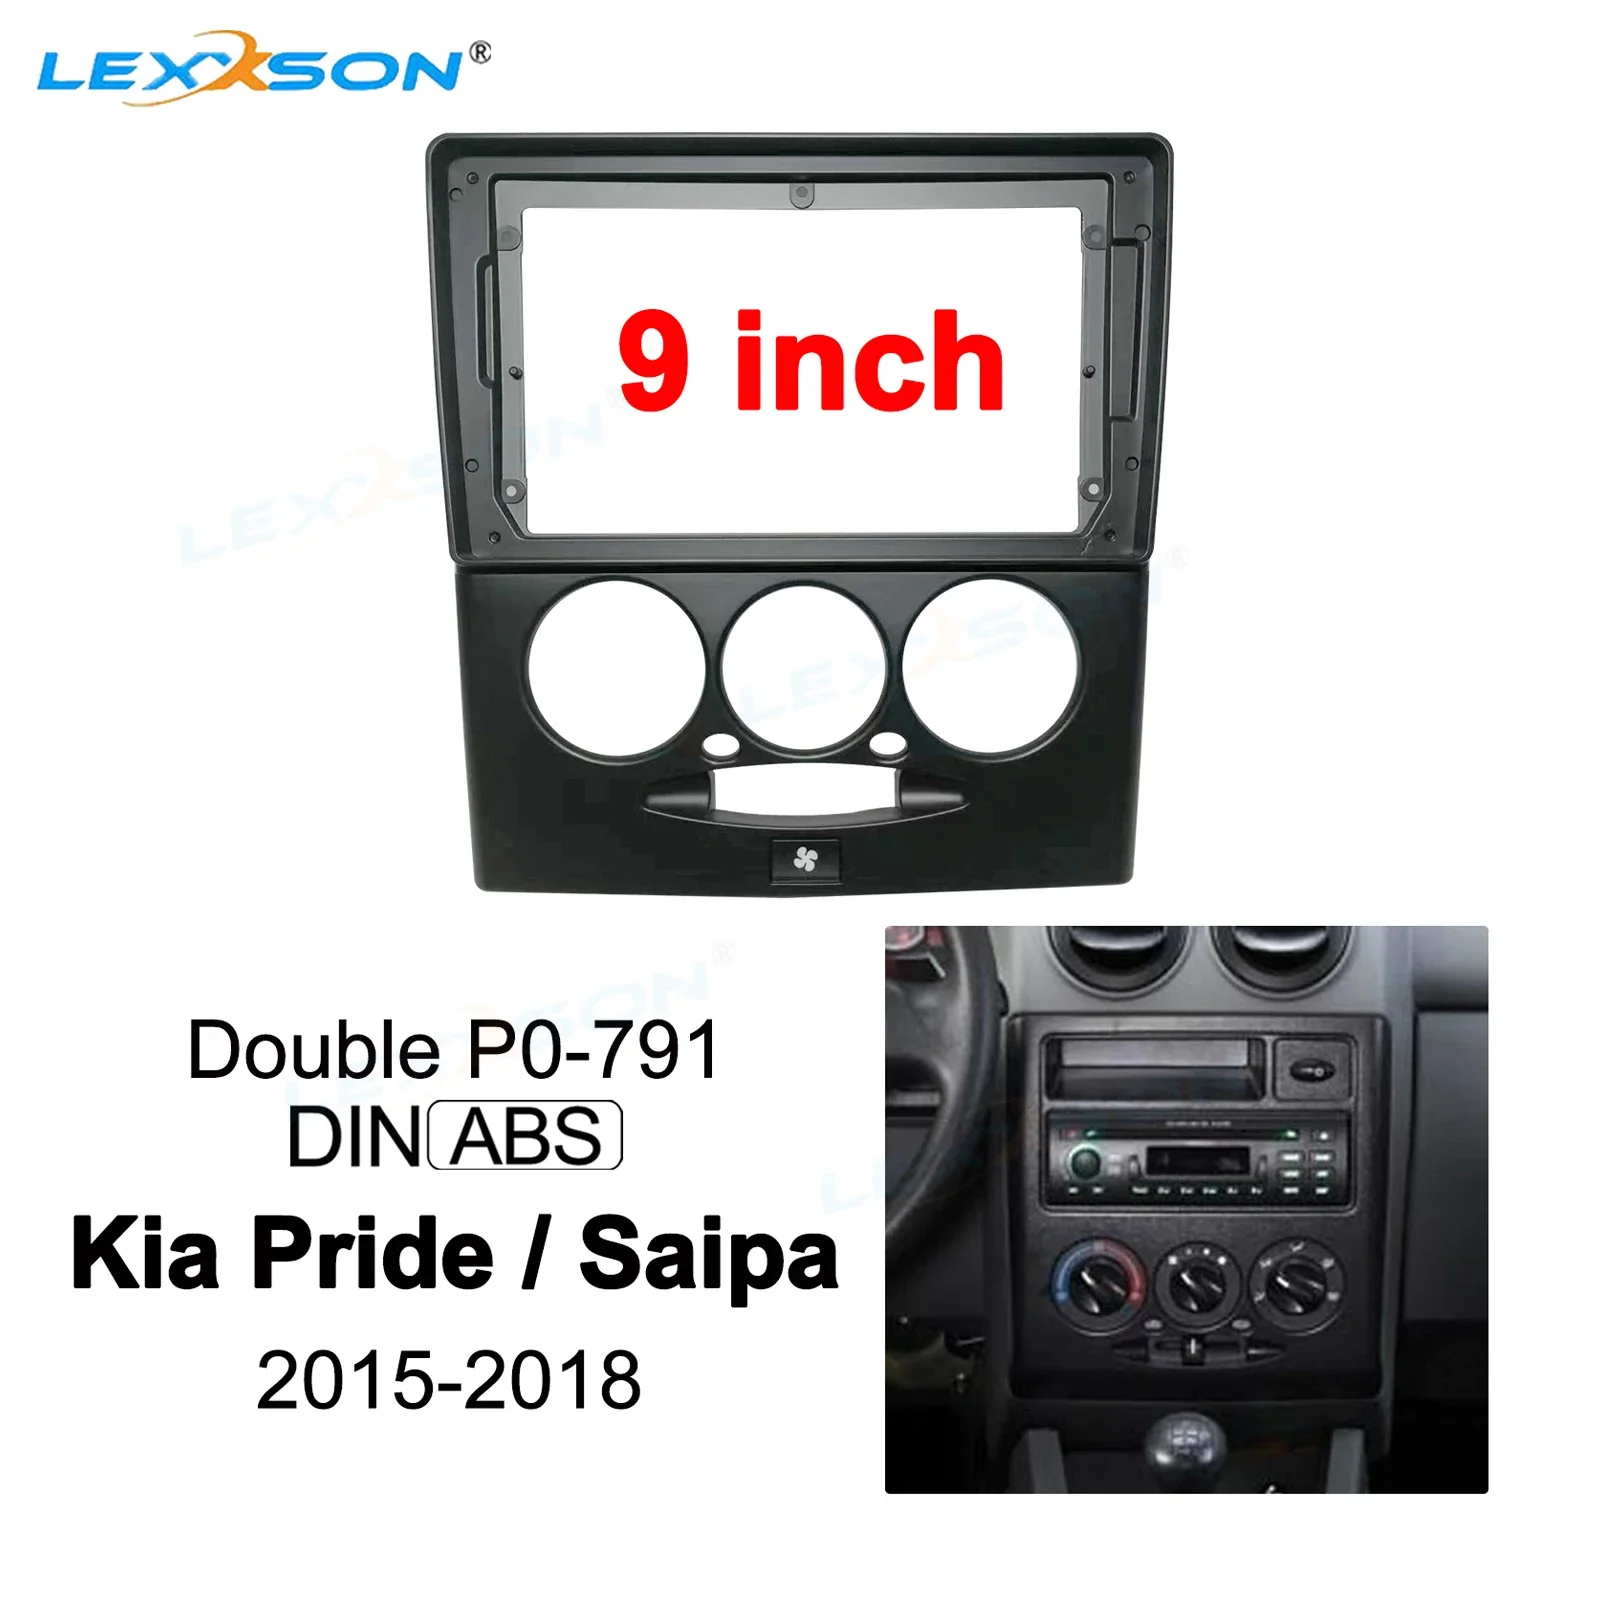 

Fits 9 Inch Car Fascia Panel For Kia Pride 2015-2018 Stereo Fitting Adaptor Dash Installation Double Din Car DVD Refit Frame Kit